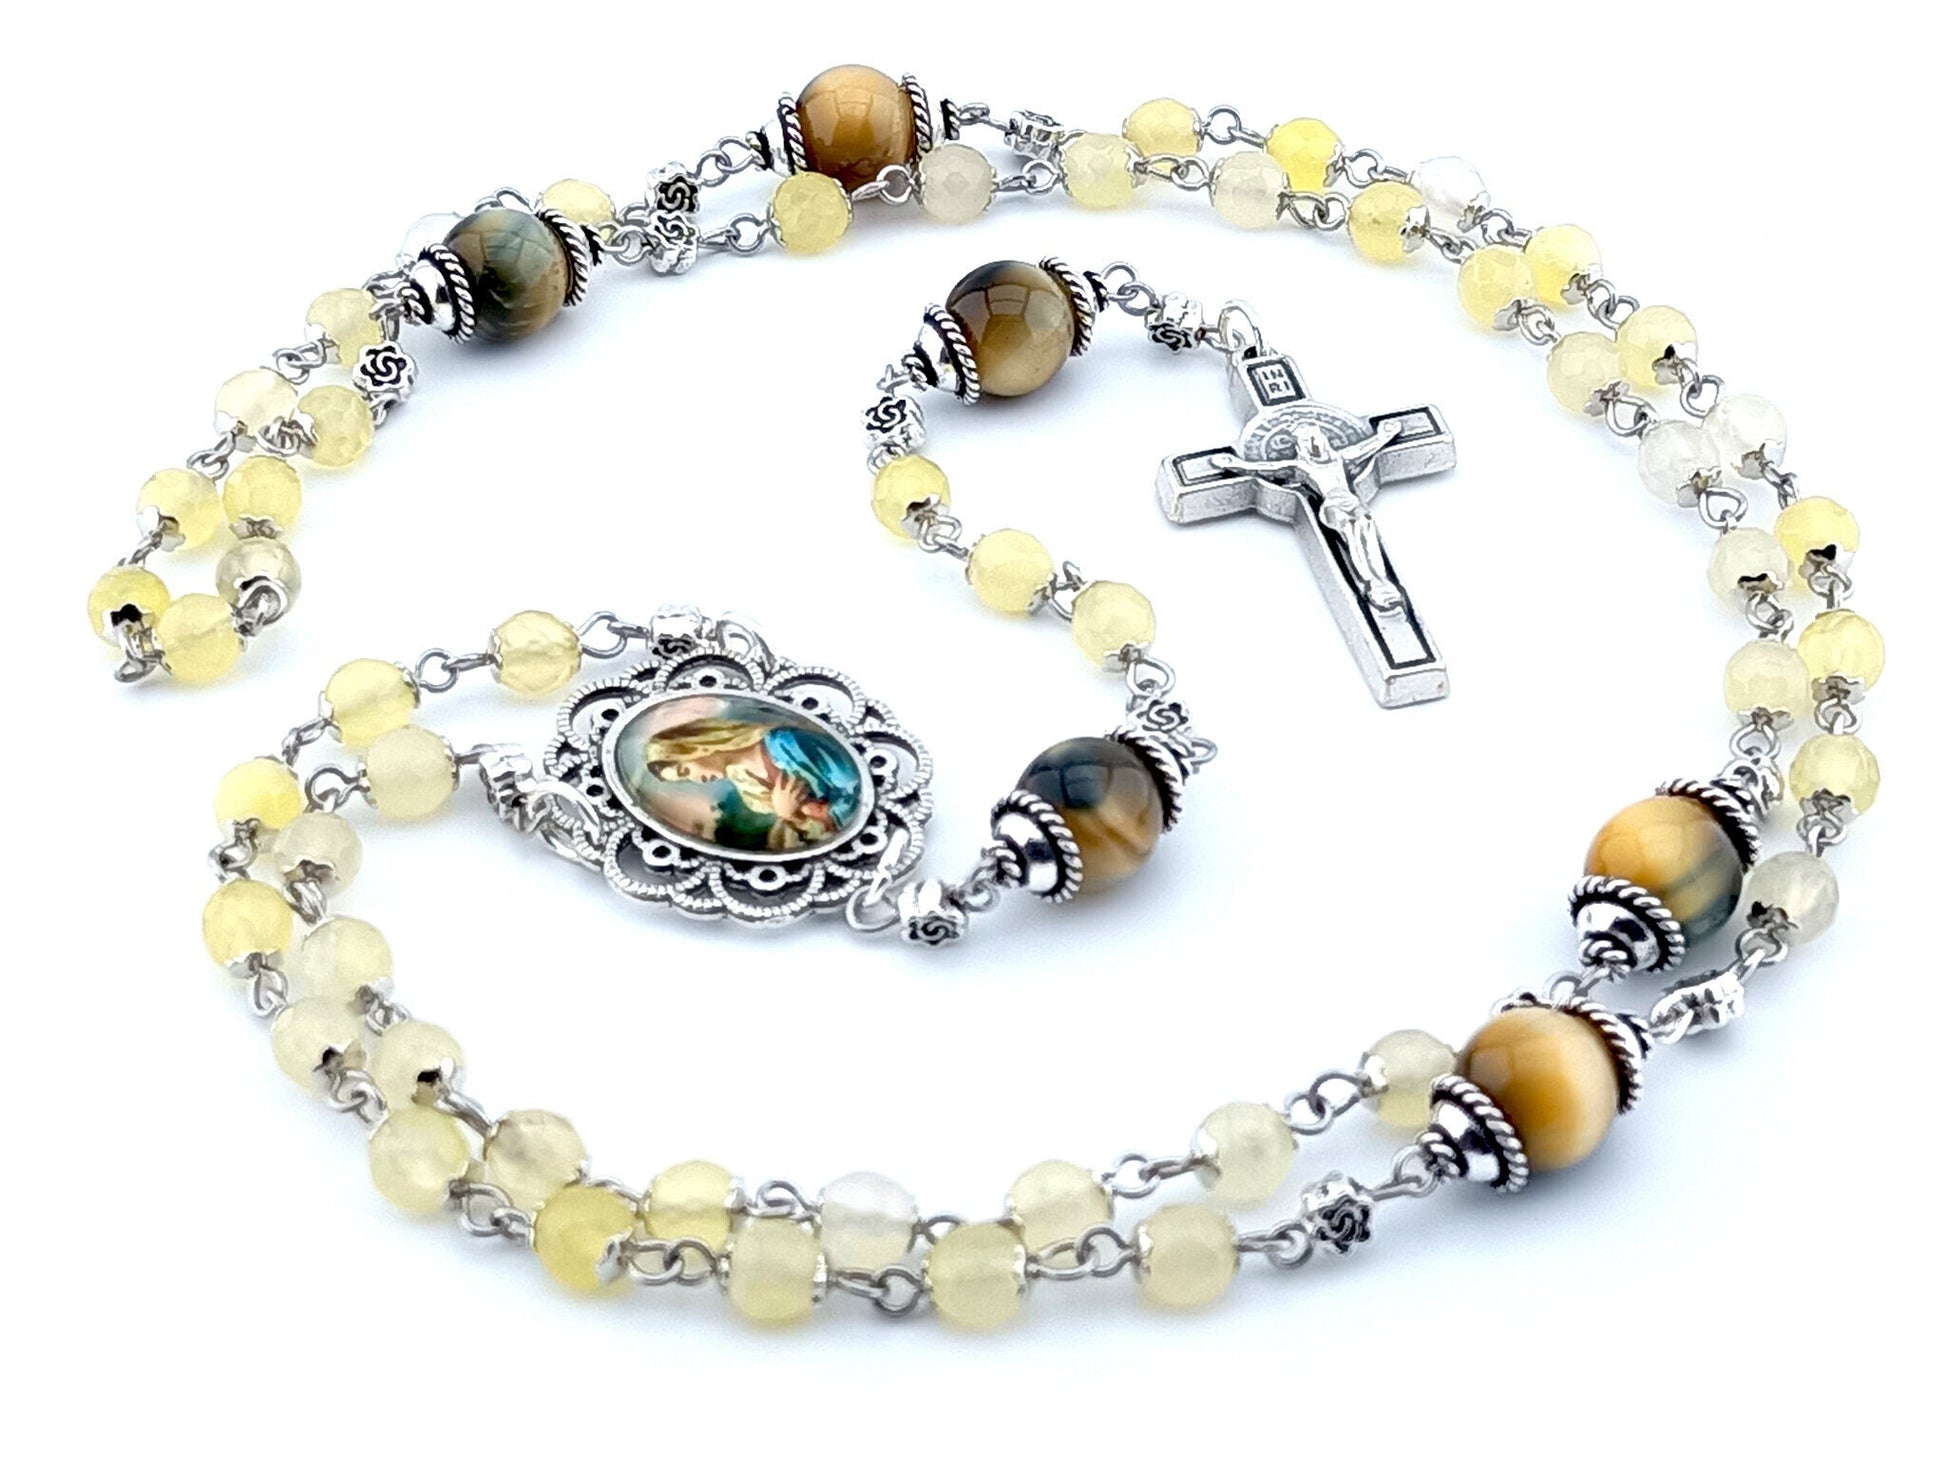 Our Lady's Fiat unique rosary beads with yellow faceted agate gemstone beads, tigers eye pater beads, silver Saint Benedict crucifix and picture centre medal.